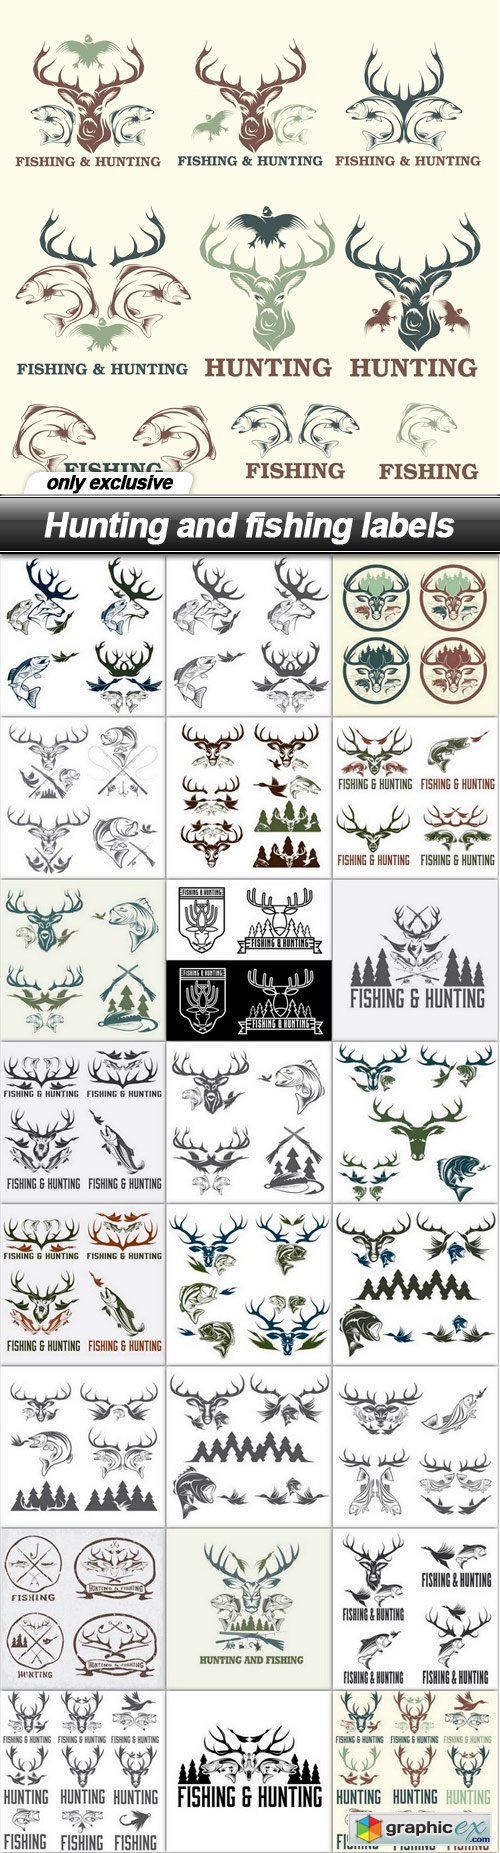 Hunting and fishing labels - 25 EPS